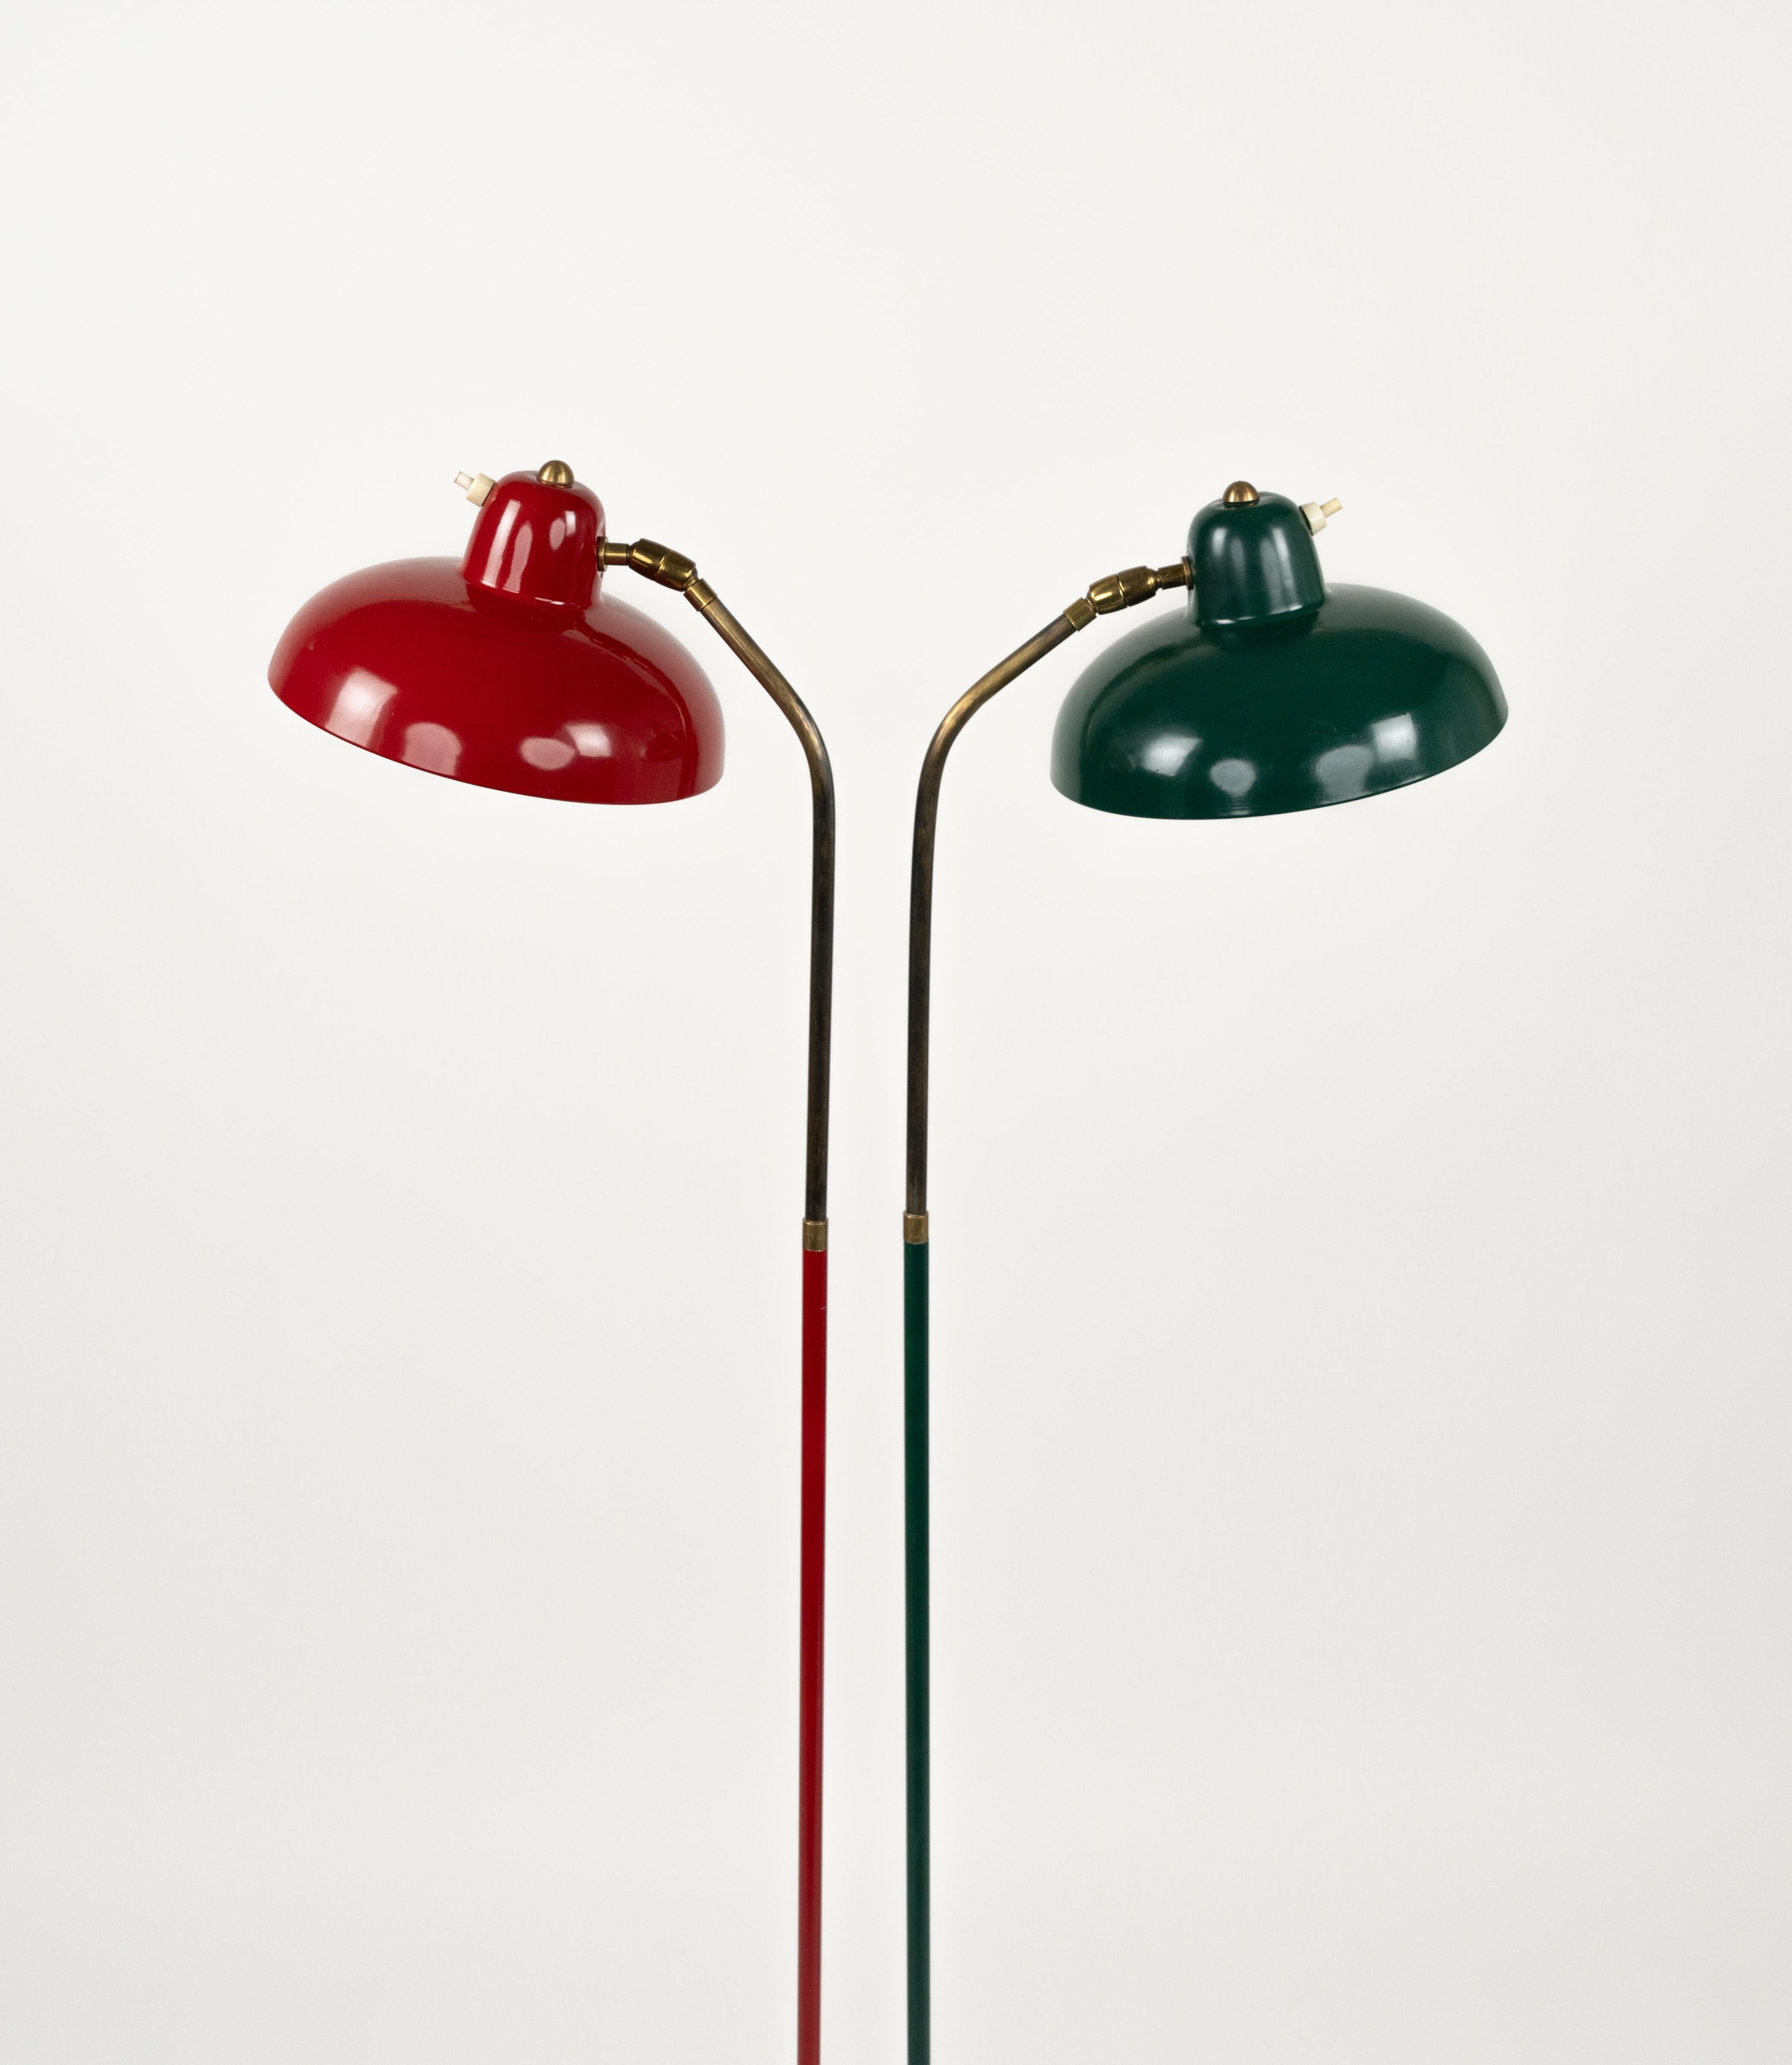 Floor Lamp in Marble, Lacquered Metal and Brass Stilnovo Style, Italy 1950s For Sale 6